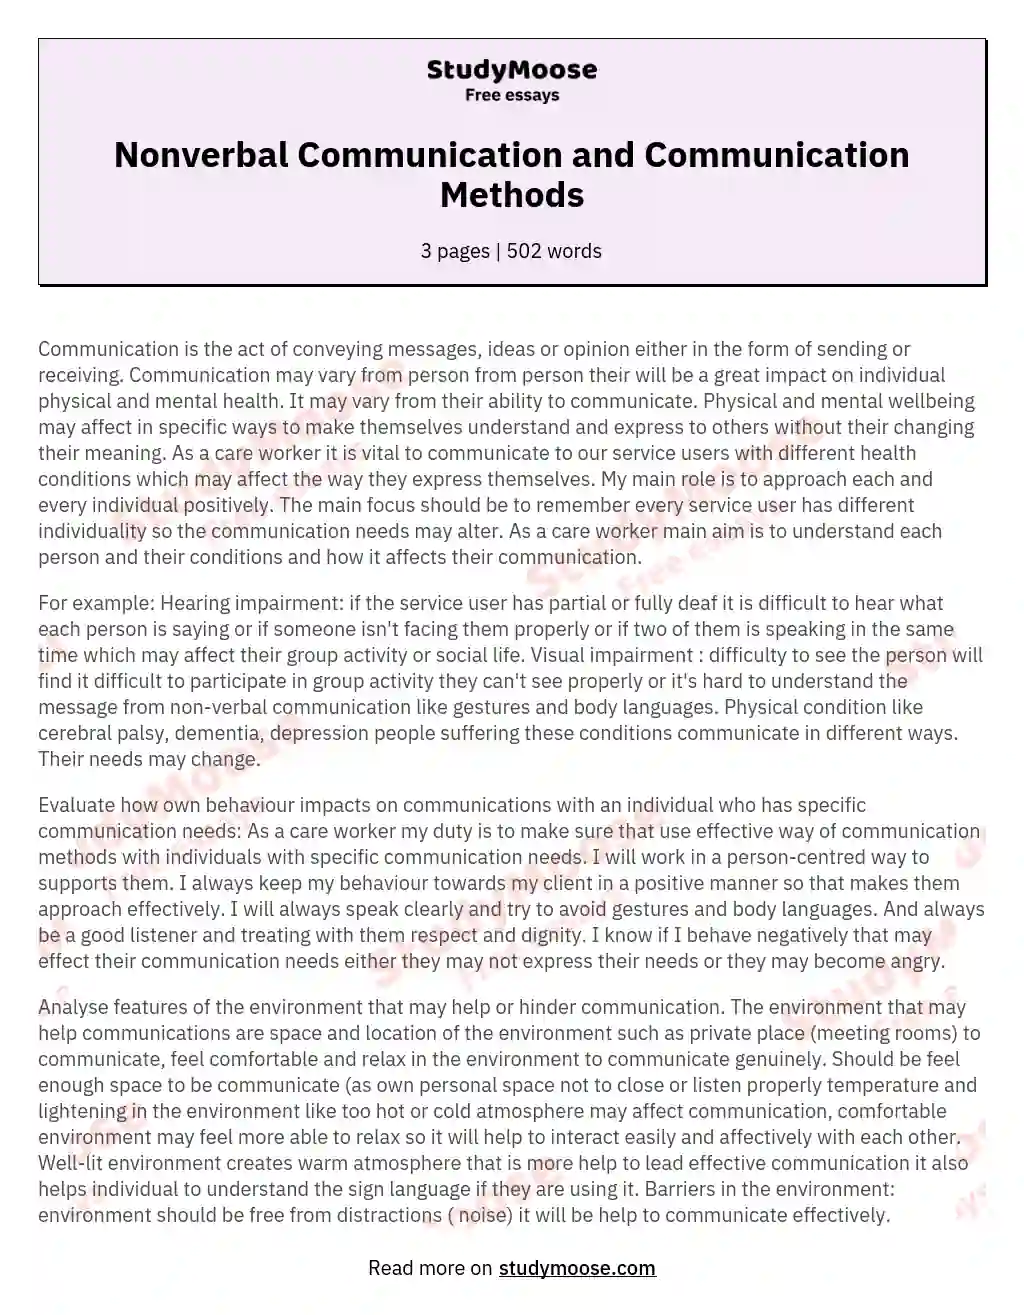 Nonverbal Communication and Communication Methods